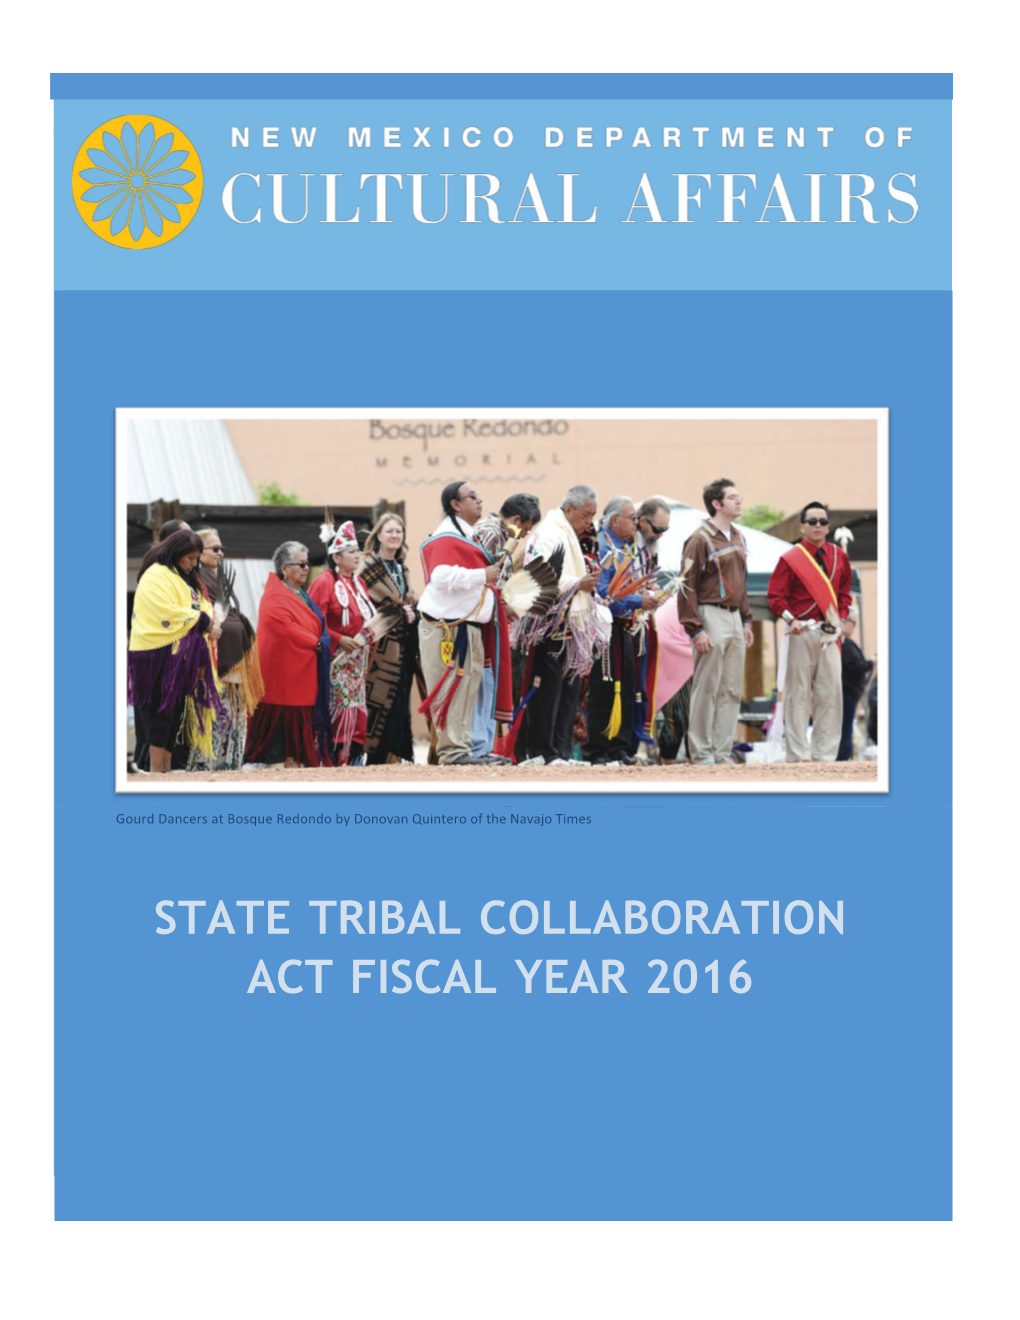 State Tribal Collaboration Act Fiscal Year 2016